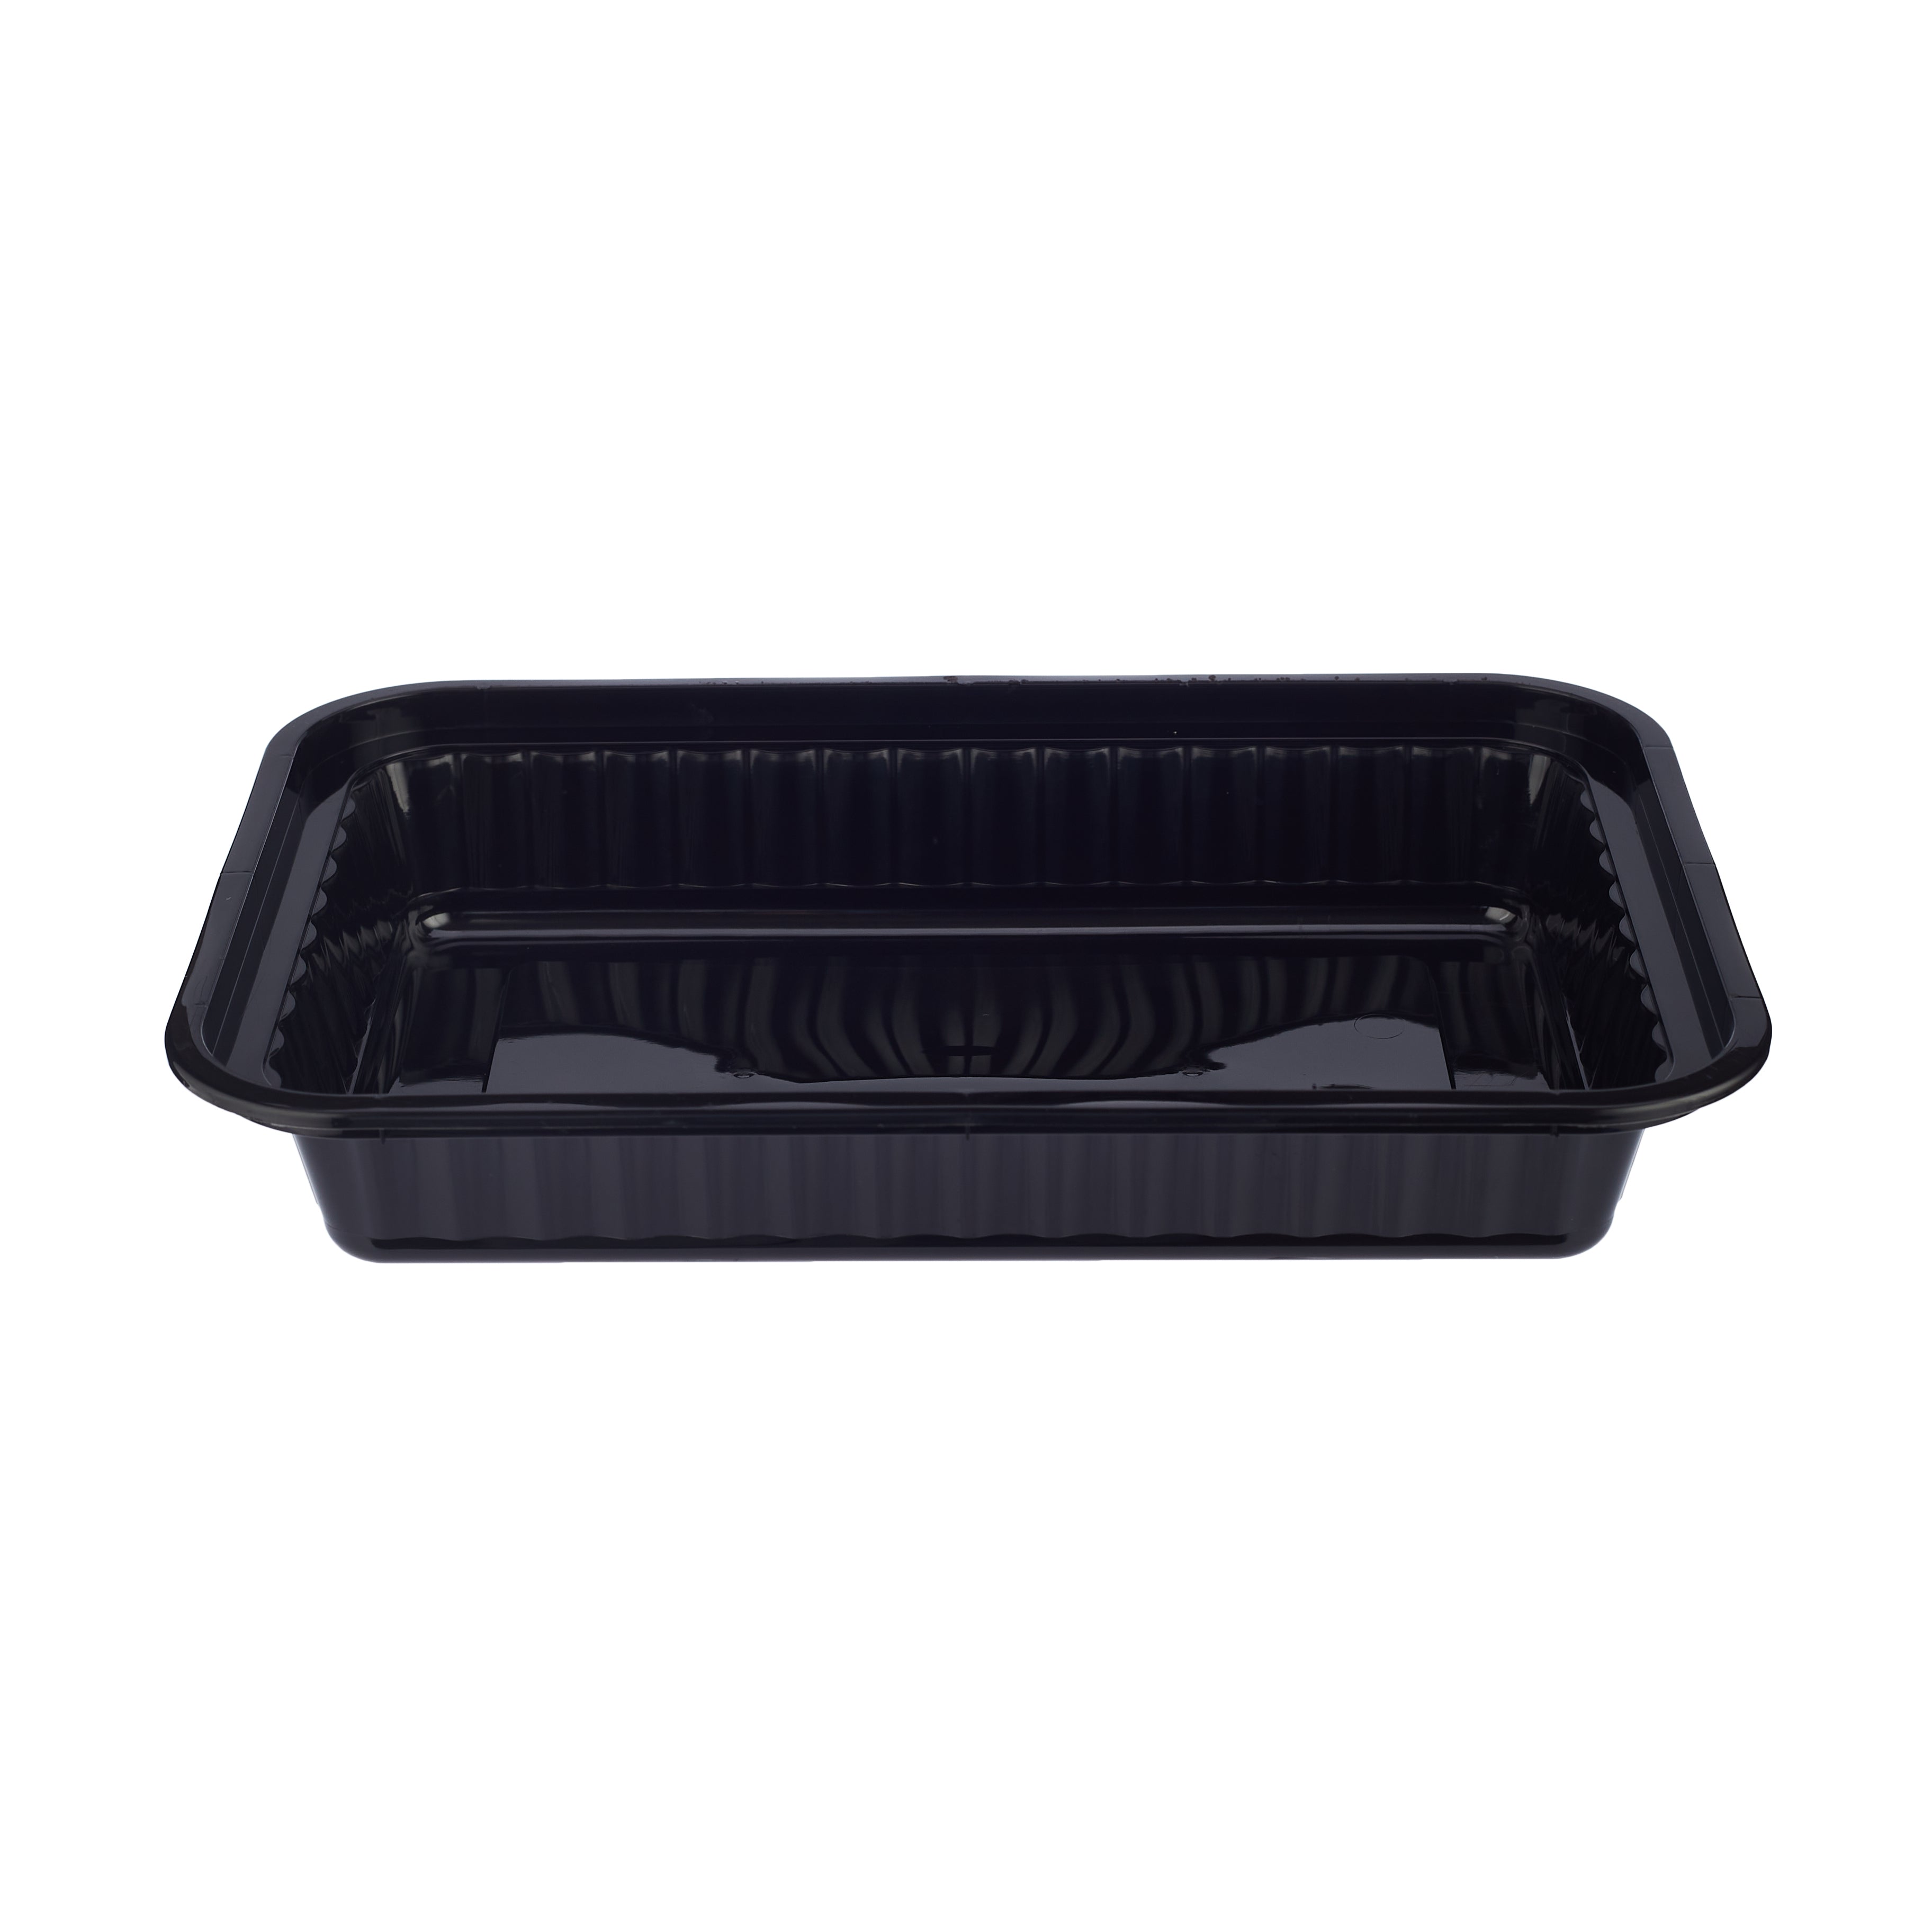 Black Base Rectangular Container With Lids